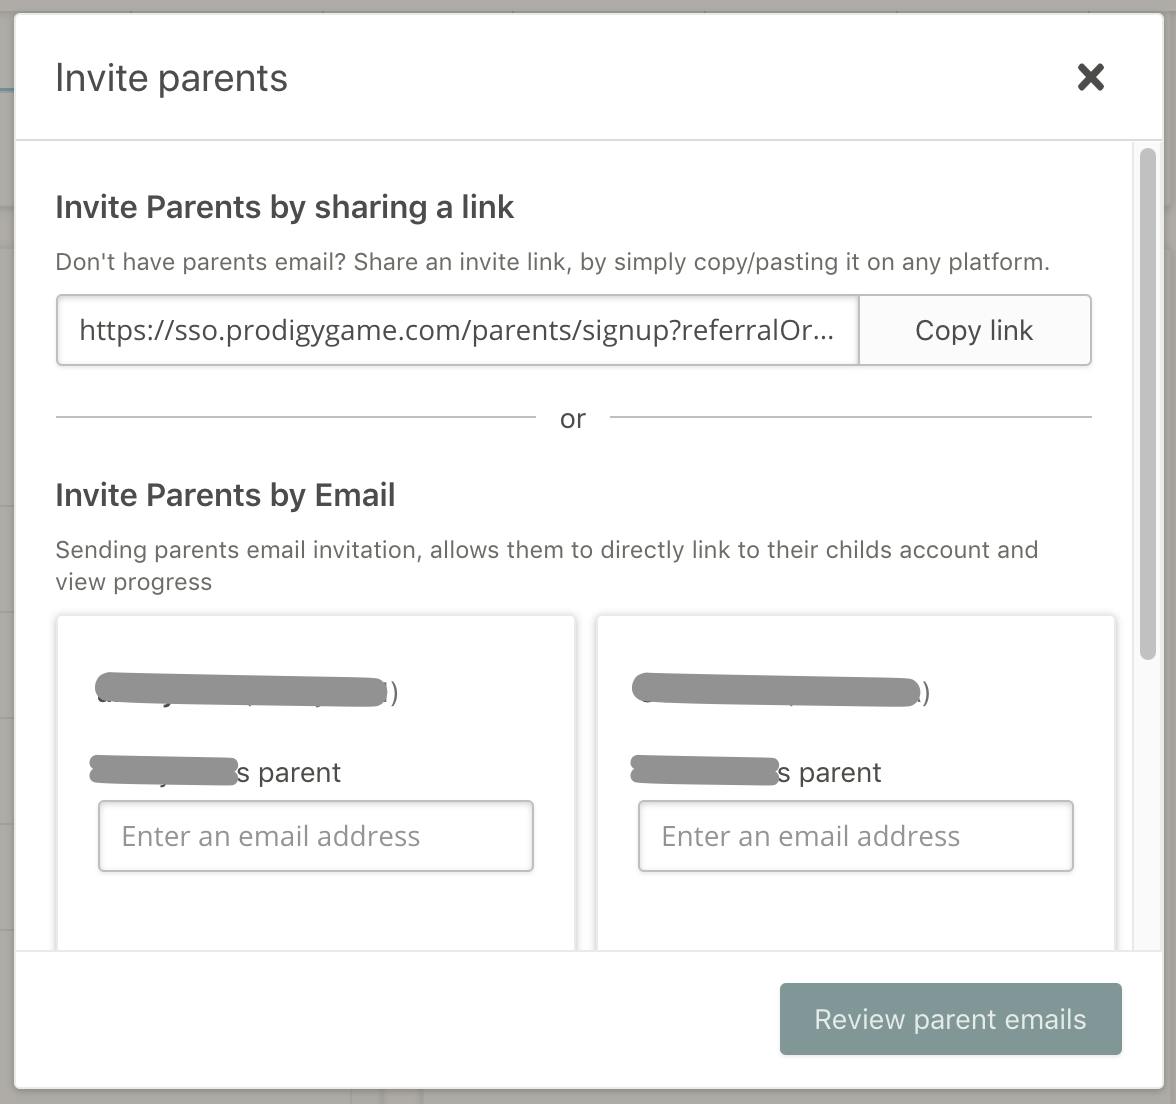 You can send Prodigy parent letters home by sharing a link or sending an email.